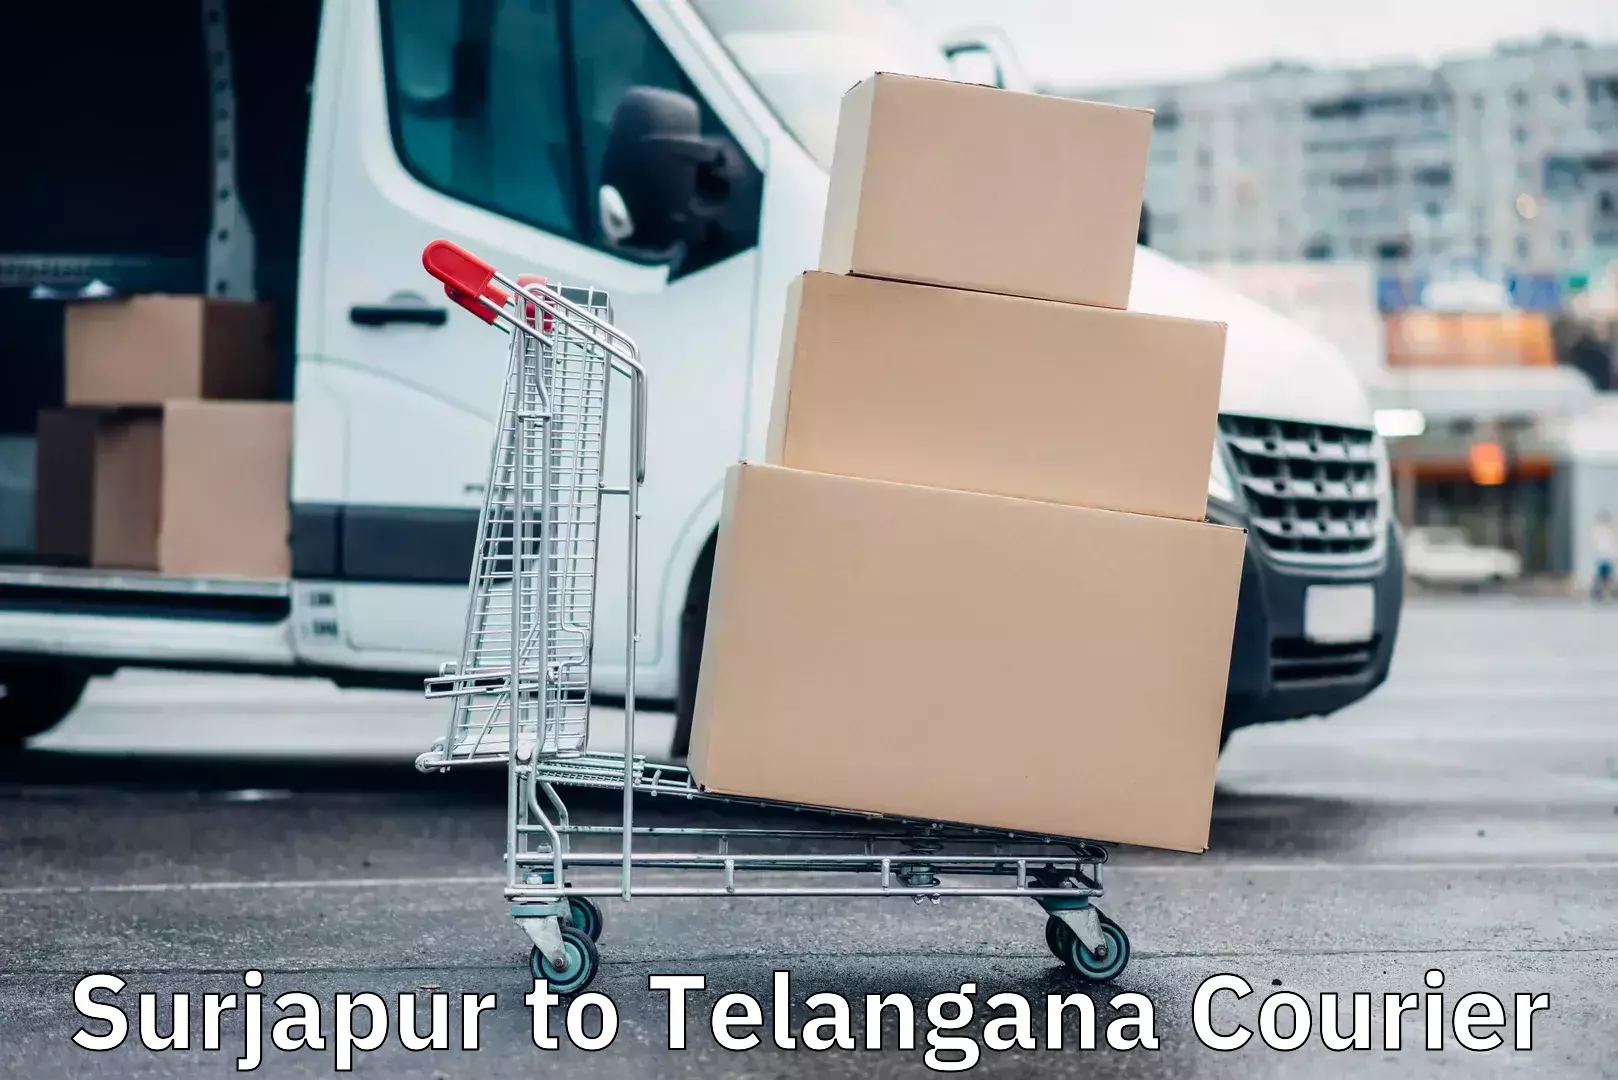 Cash on delivery service Surjapur to Telangana